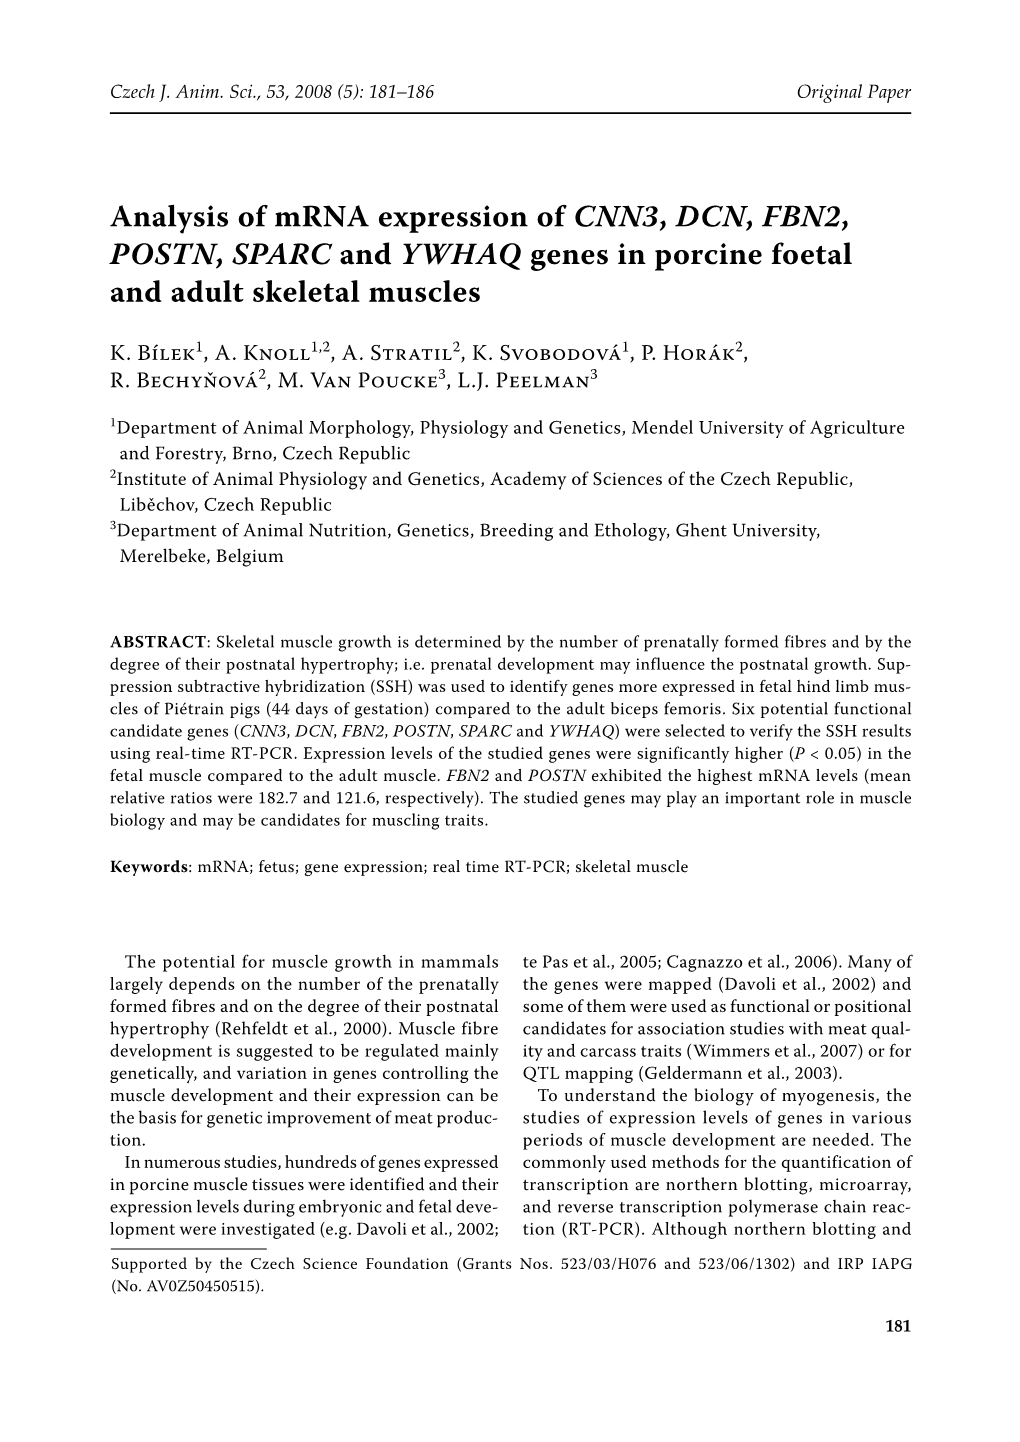 Analysis of Mrna Expression of CNN3, DCN, FBN2, POSTN, SPARC and YWHAQ Genes in Porcine Foetal and Adult Skeletal Muscles